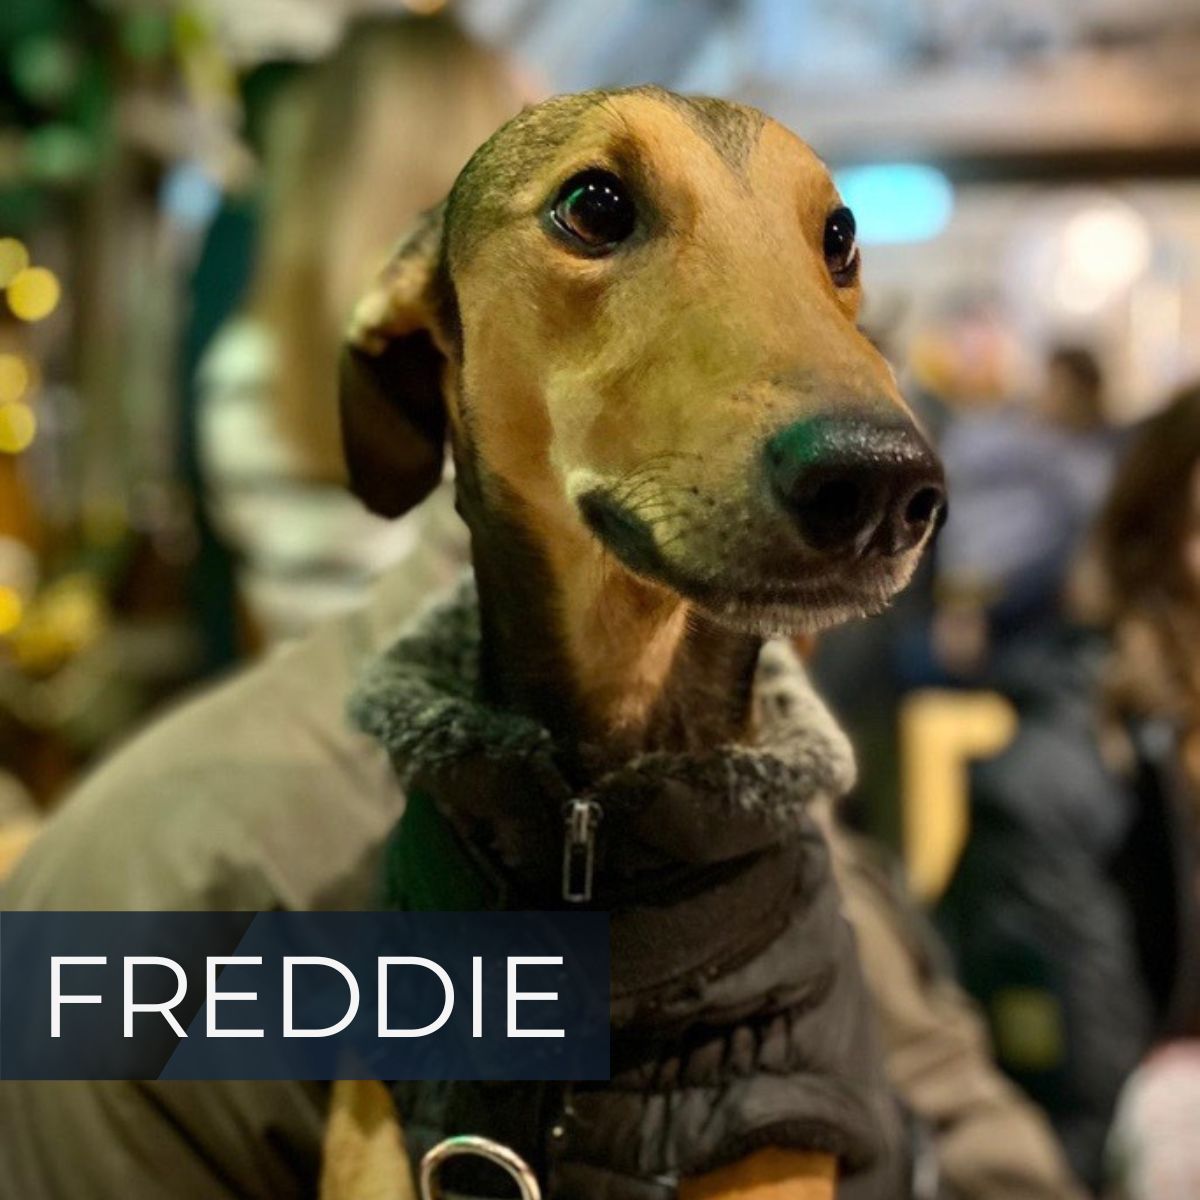 And to finish off National Pet Month… 🐾

𝗡𝗮𝗺𝗲: Freddie

𝗔𝗴𝗲: 2

𝗝𝗼𝗯 𝗧𝗶𝘁𝗹𝗲: Pest Control

𝗟𝗶𝗸𝗲𝘀: Cuddles

𝗗𝗶𝘀𝗹𝗶𝗸𝗲𝘀: The Postman

#NationalPetMonth #OfficeDog #PetPawsitivity #Pets